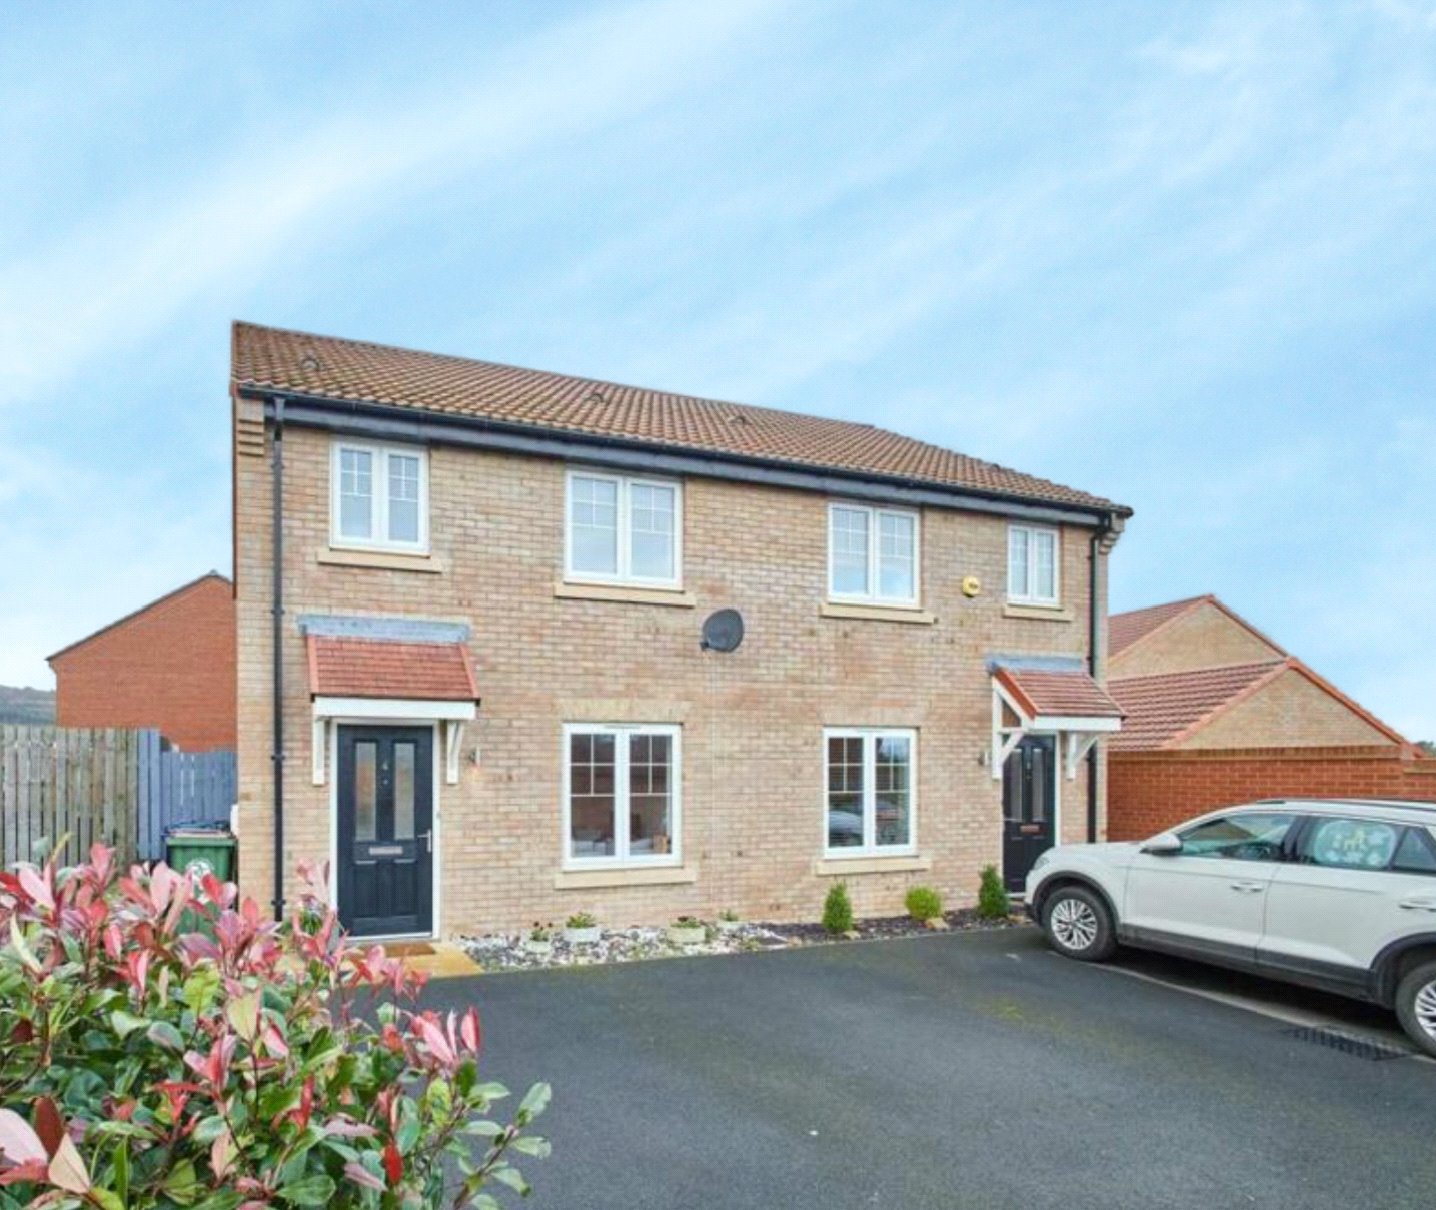 3 bed house for sale in Pennyman Close, Saltburn-by-the-Sea - Property Image 1